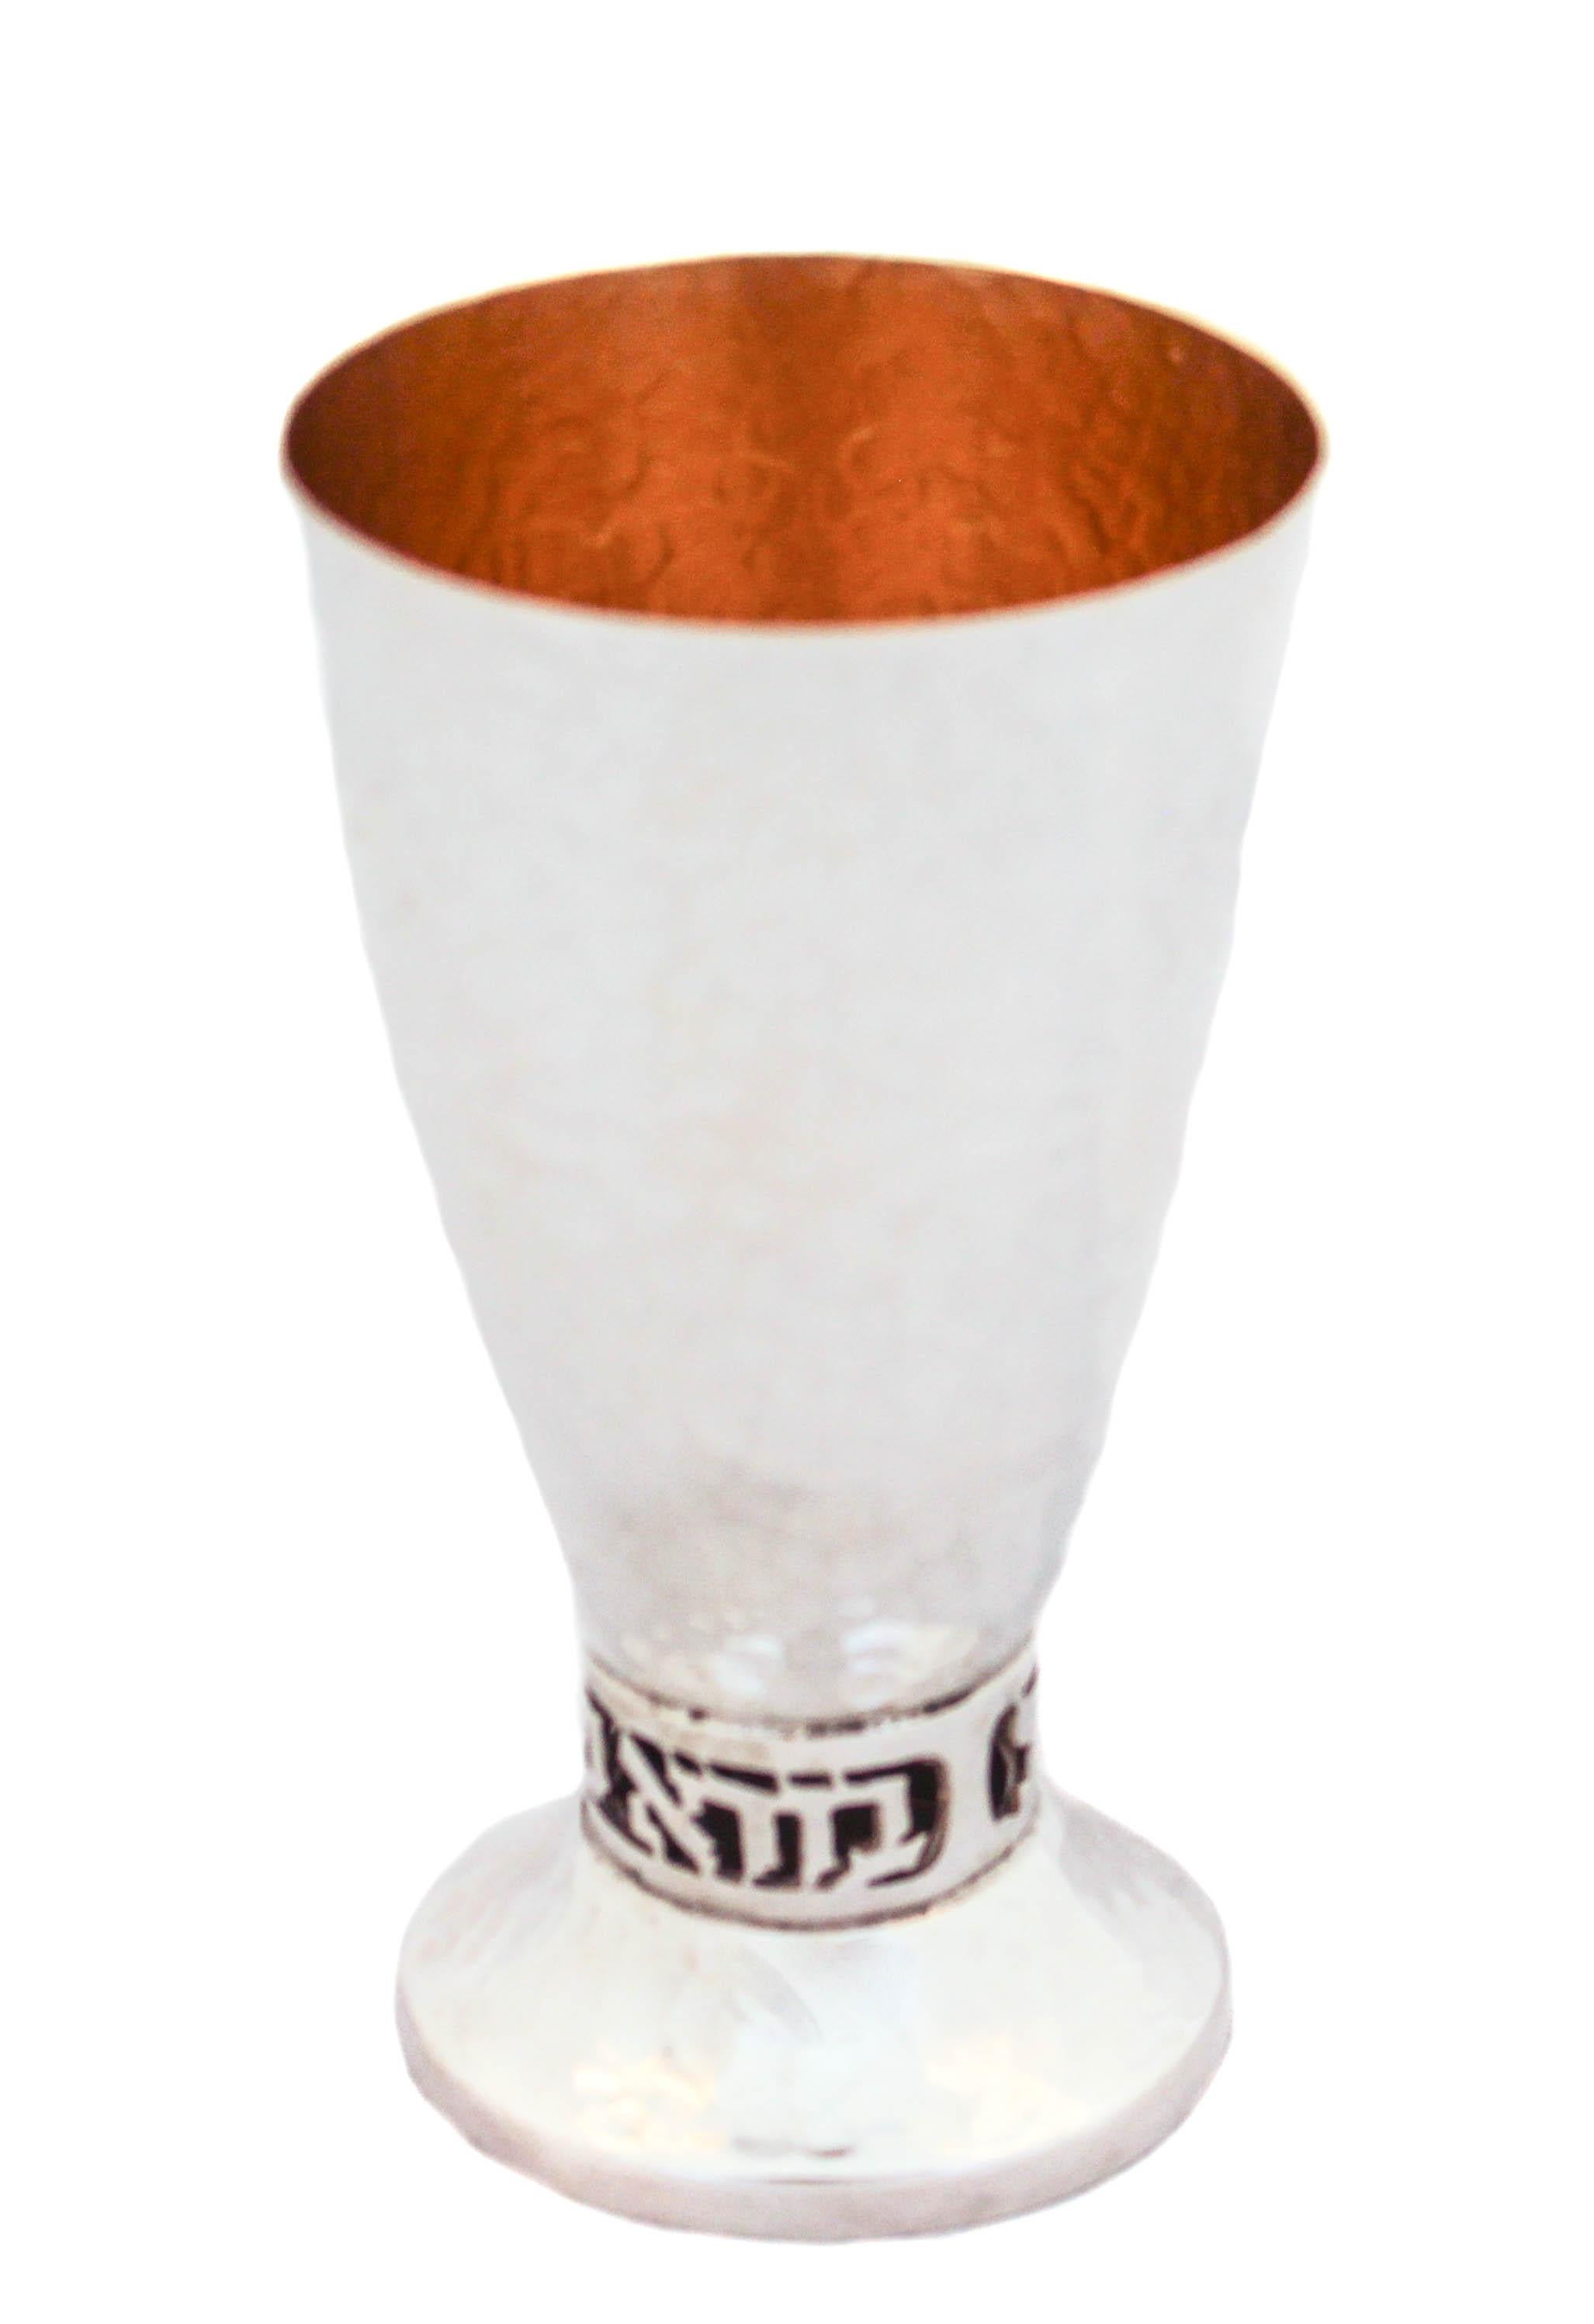 Being offered is a new sterling silver Kiddush cup made in Israel. It is hand hammered and has a gold-wash finish on the inside. Between the cup and base the Hebrew words “borei pre hagefen” (“creator of the grape” are cutout of the silver. The